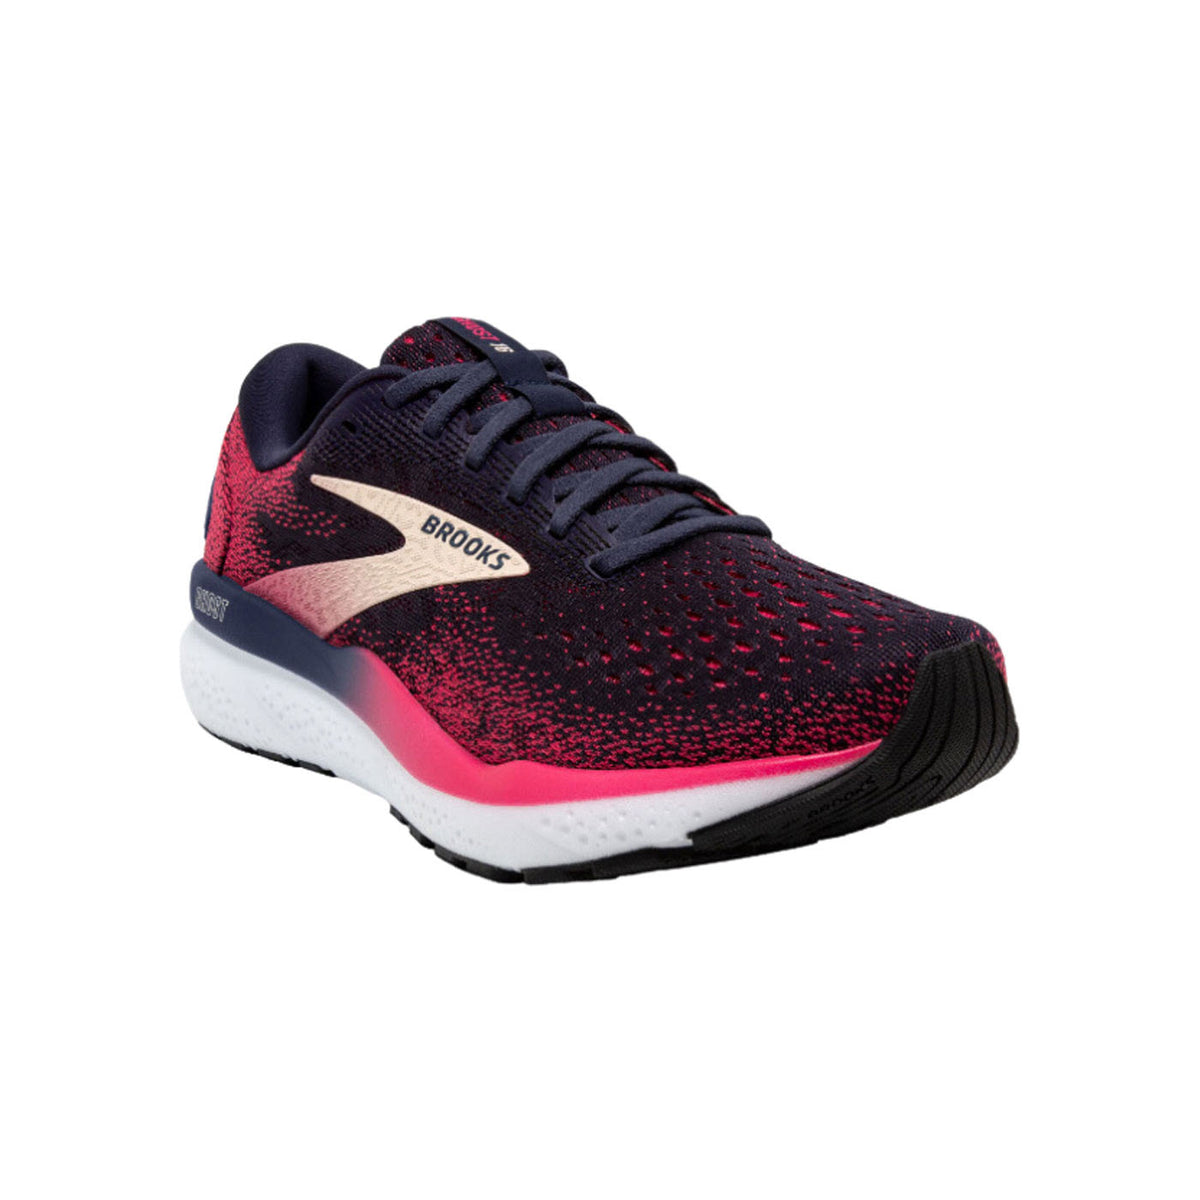 A BROOKS GHOST 16 PEACOAT/RASPBERRY/APRICOT - WOMENS with a navy blue upper, pink accents, a white midsole, and a black outsole. It features the Brooks logo on the side and is part of the Ghost 16 series.